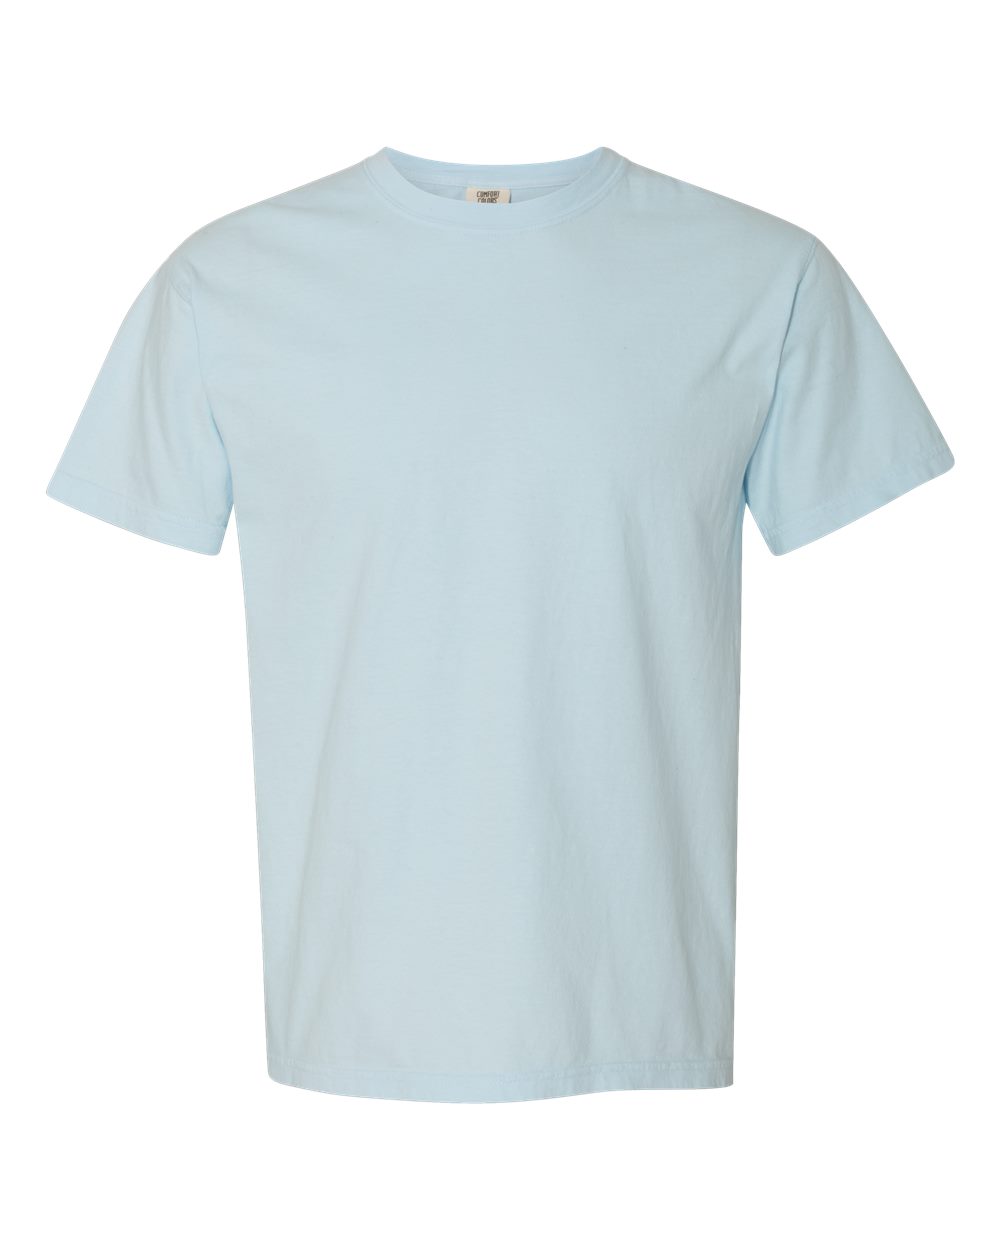 Comfort Colors Garment-Dyed Tee (1717) in Chambray